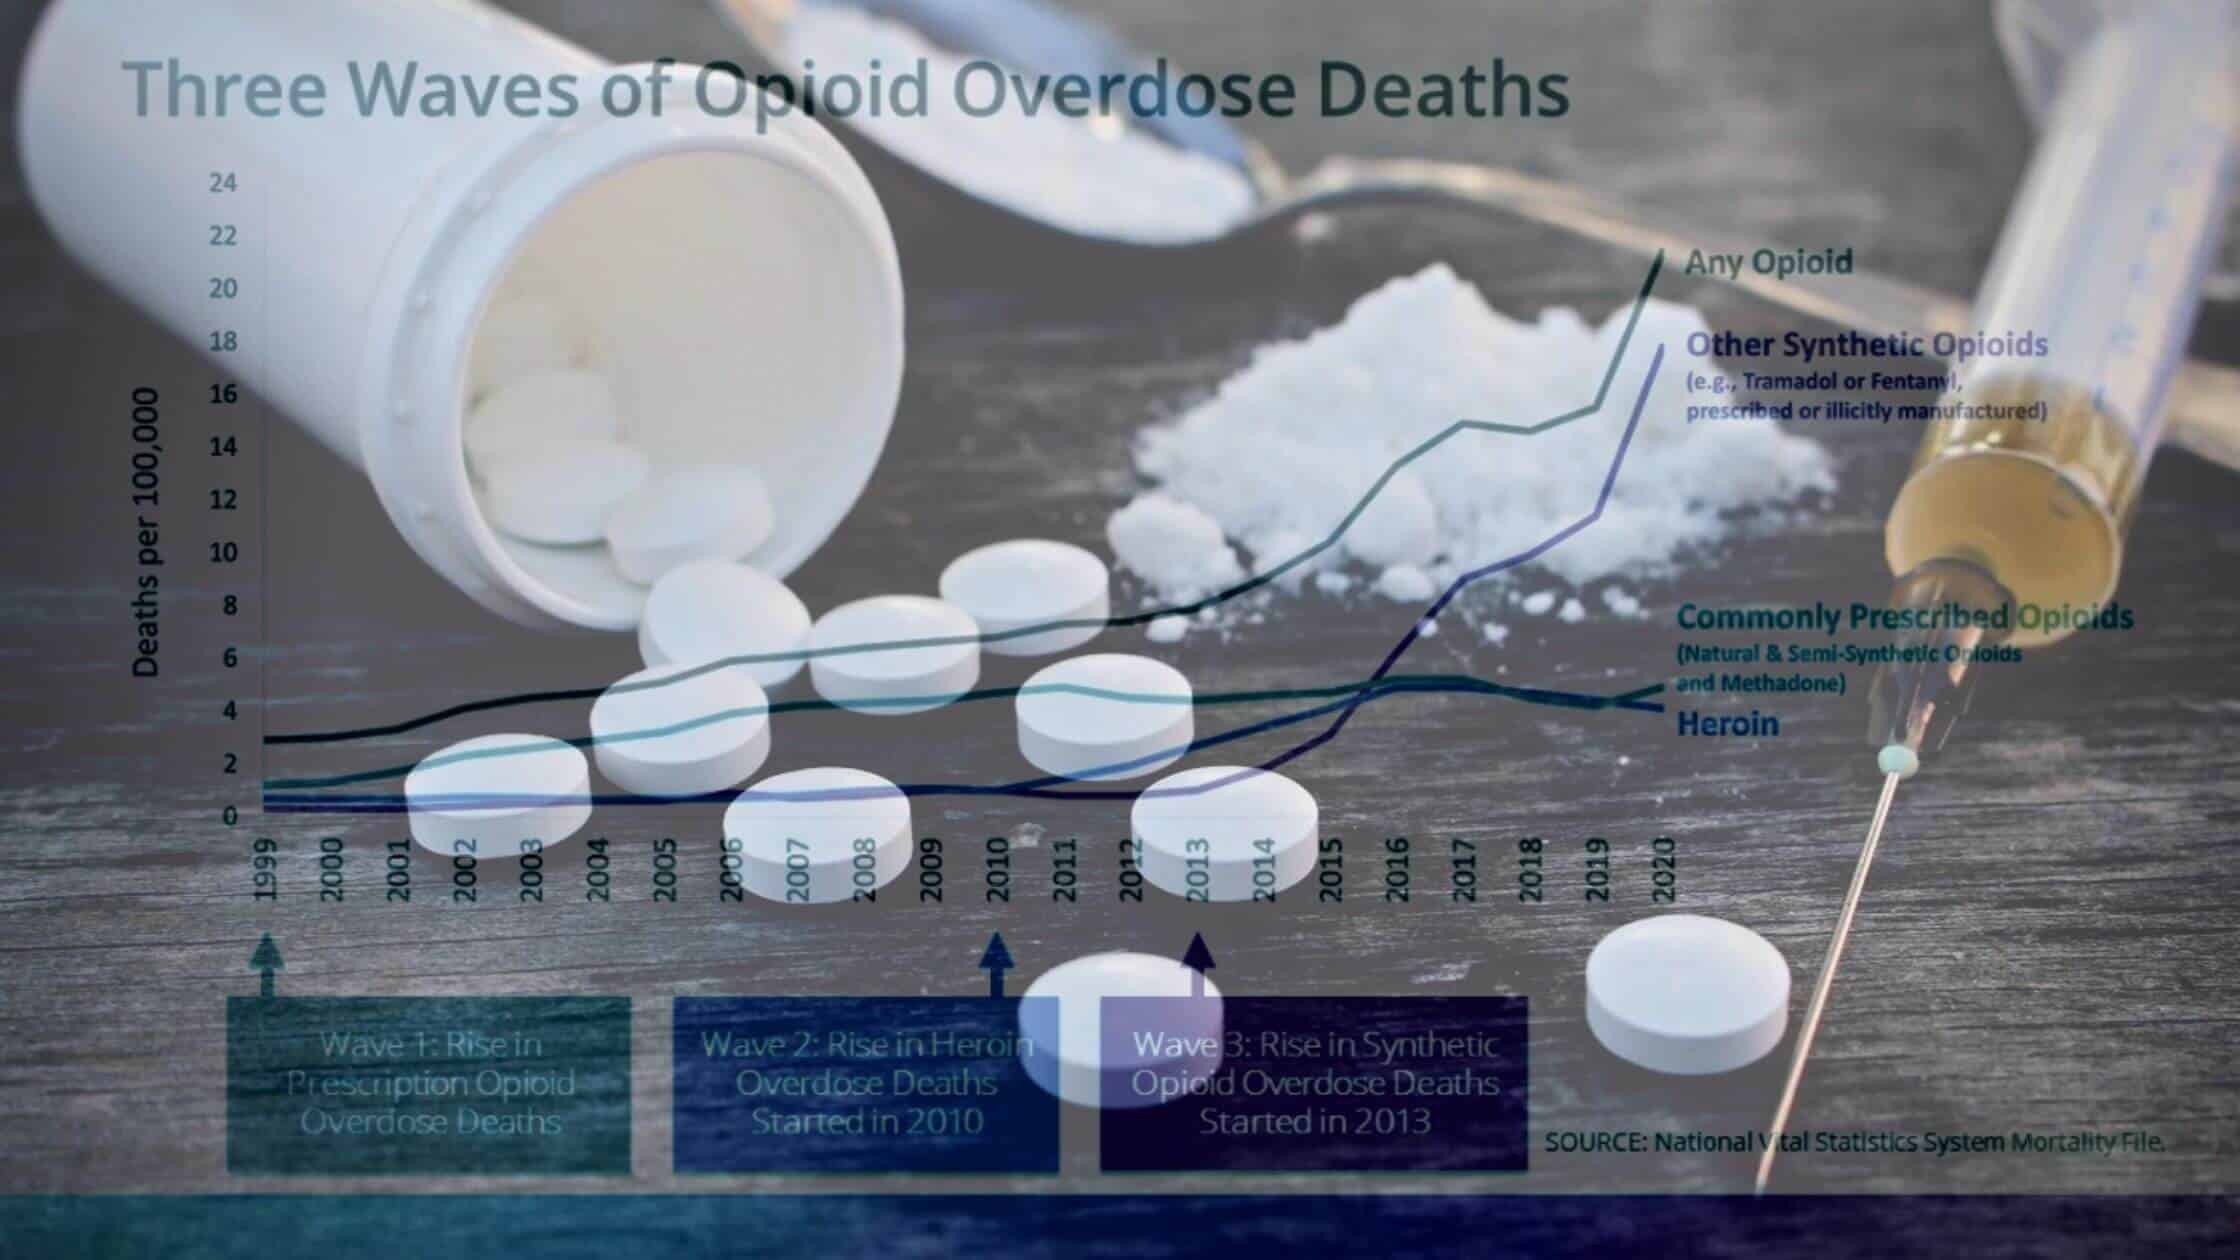 State-level Non-fatal Opioid Overdoses: The White House Releases A New Data Map